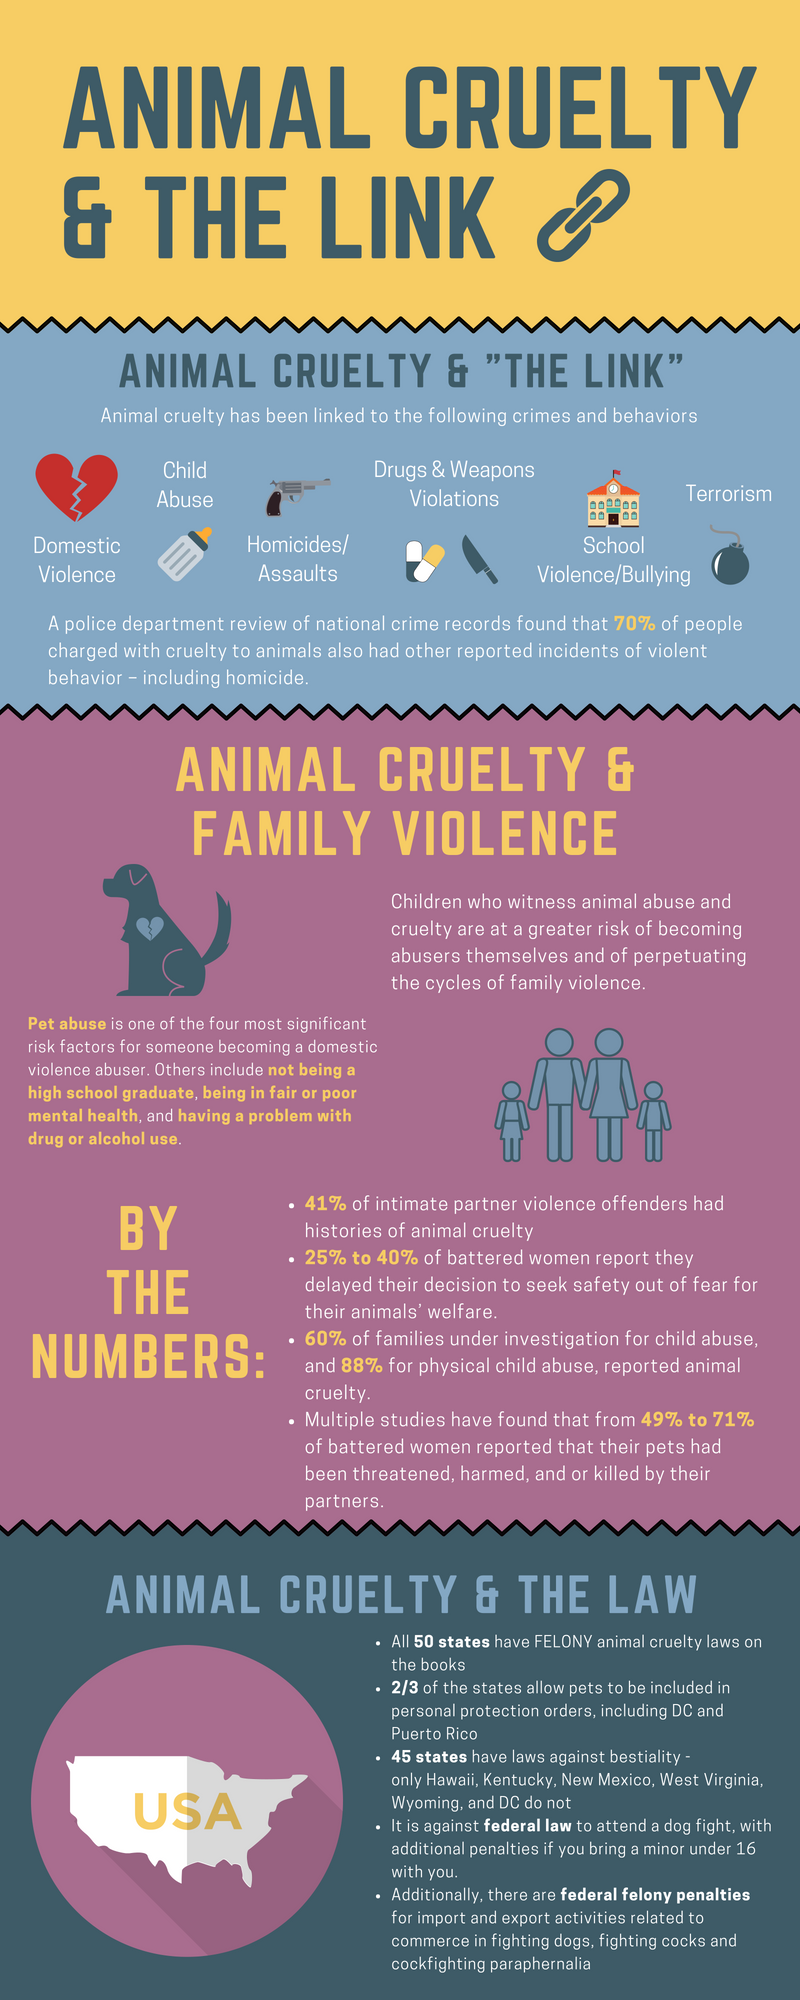 Animal Cruelty and Crimes Against Humans | NATIONAL SHERIFFS' ASSOCIATION